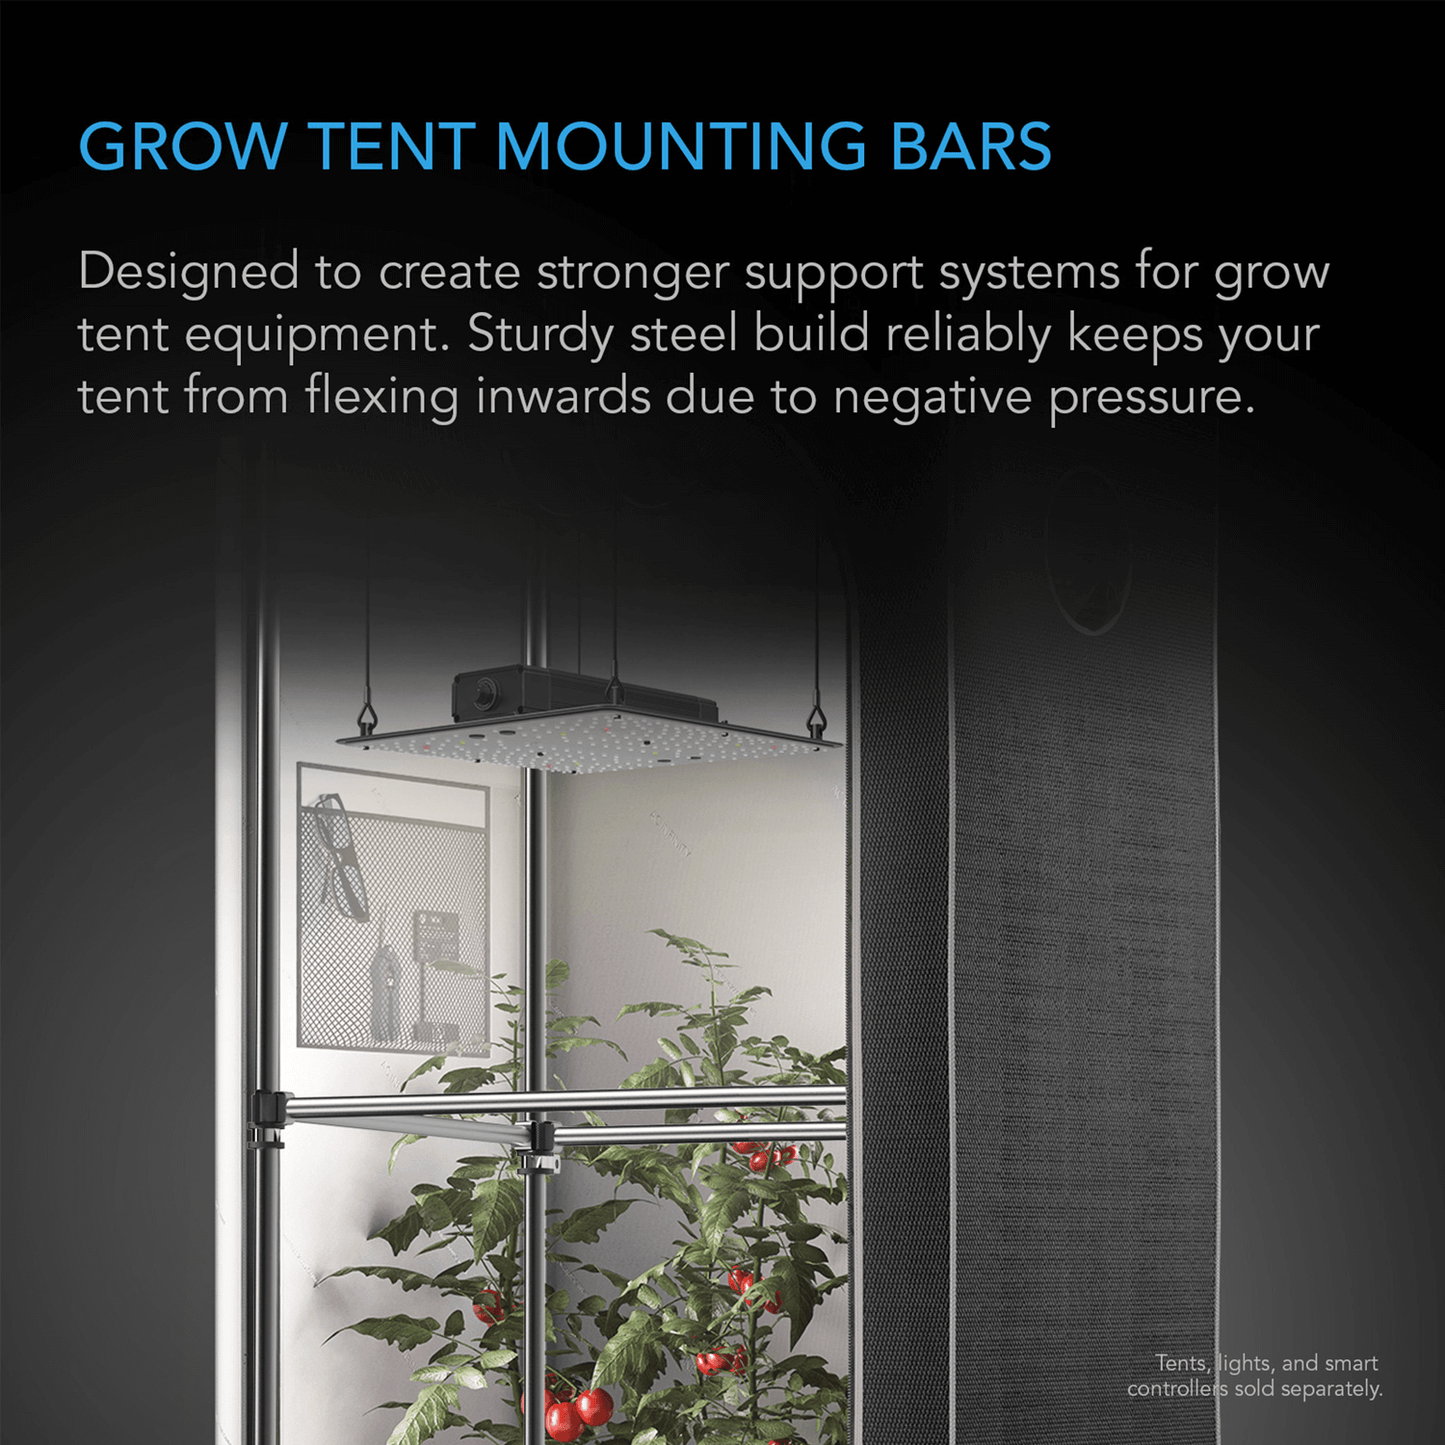 AC Infinity Grow Tent Mounting Bars, for Indoor Grow Spaces, 2x4' AC-HCA24 Grow Tents